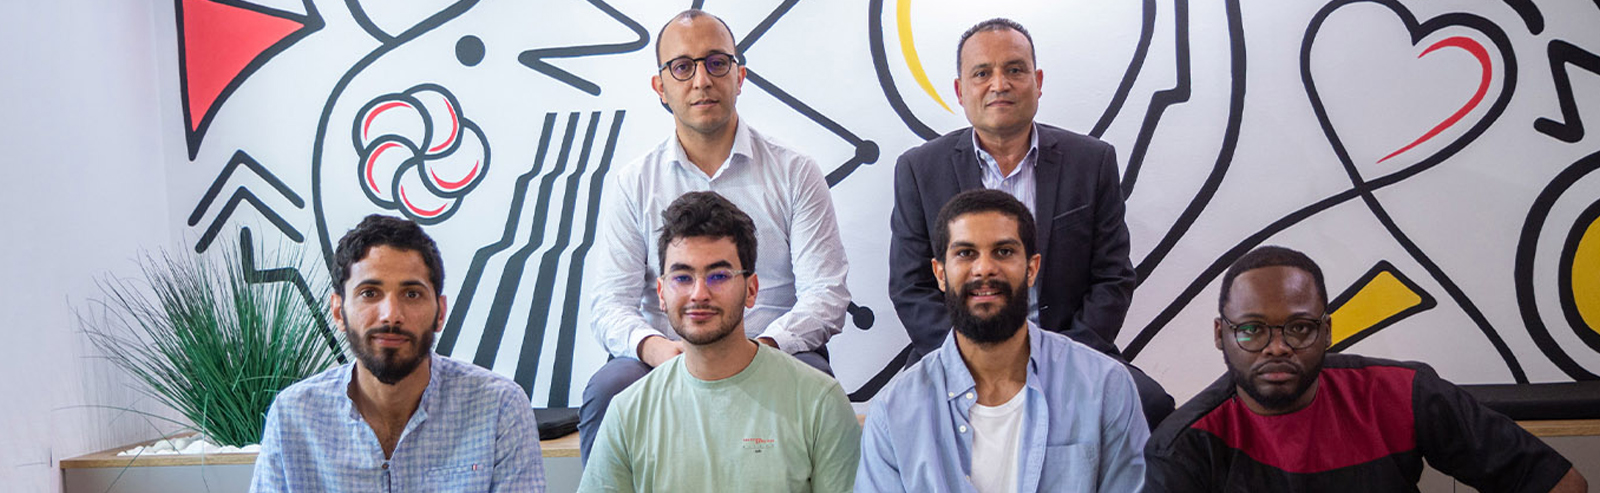 Linedata Tunis unveiled the FinTech startups selected for the “Moove with Linedata”